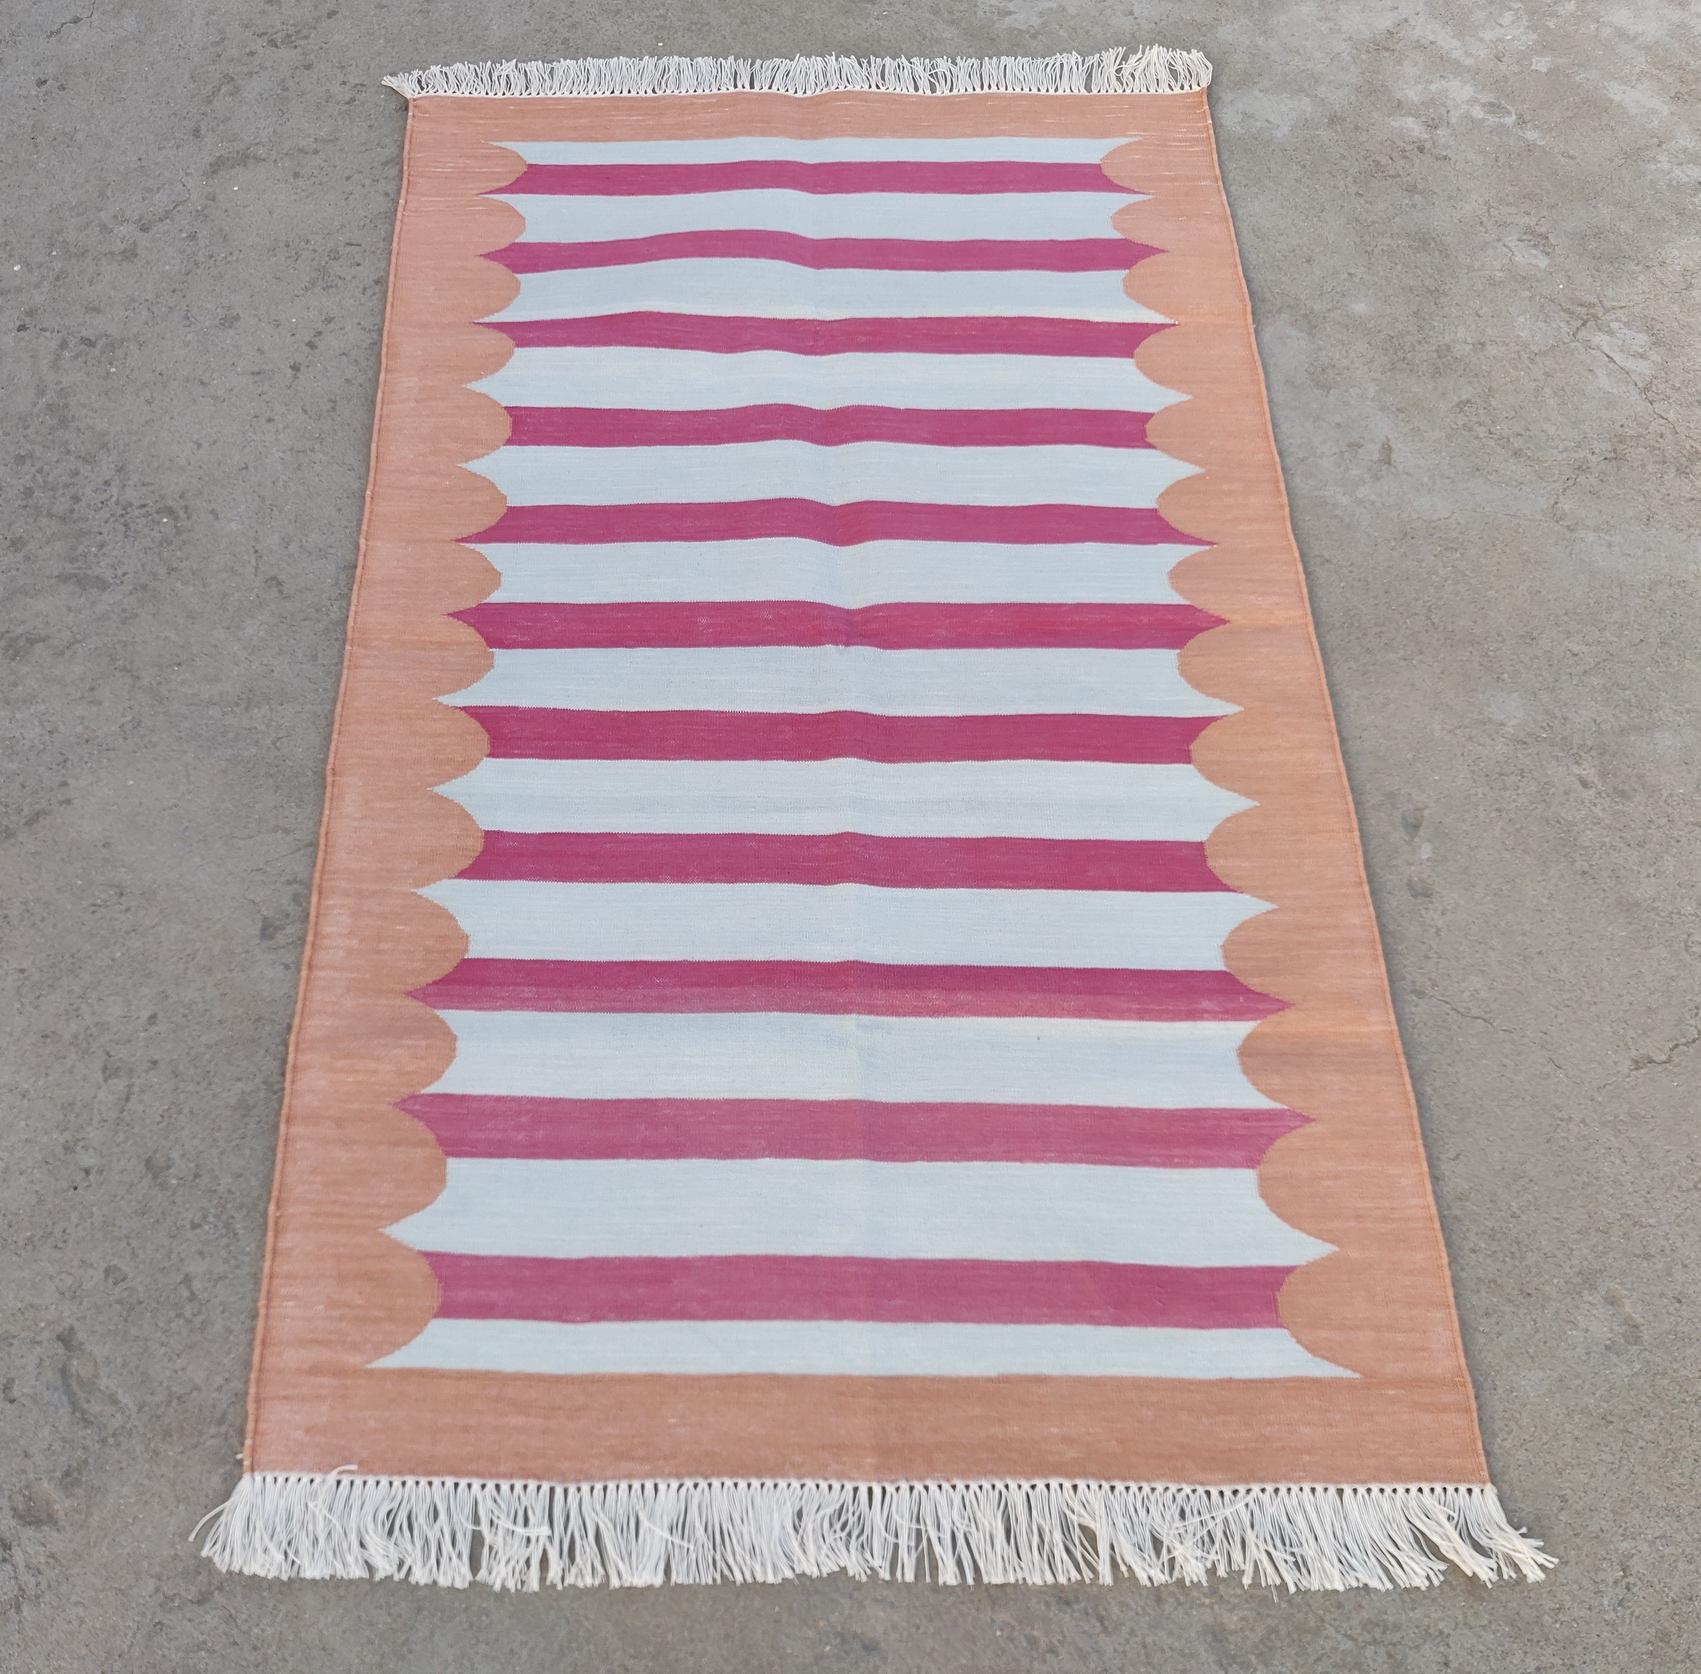 Hand-Woven Handmade Cotton Area Flat Weave Rug, 3x5 Pink And Tan Striped Indian Dhurrie Rug For Sale